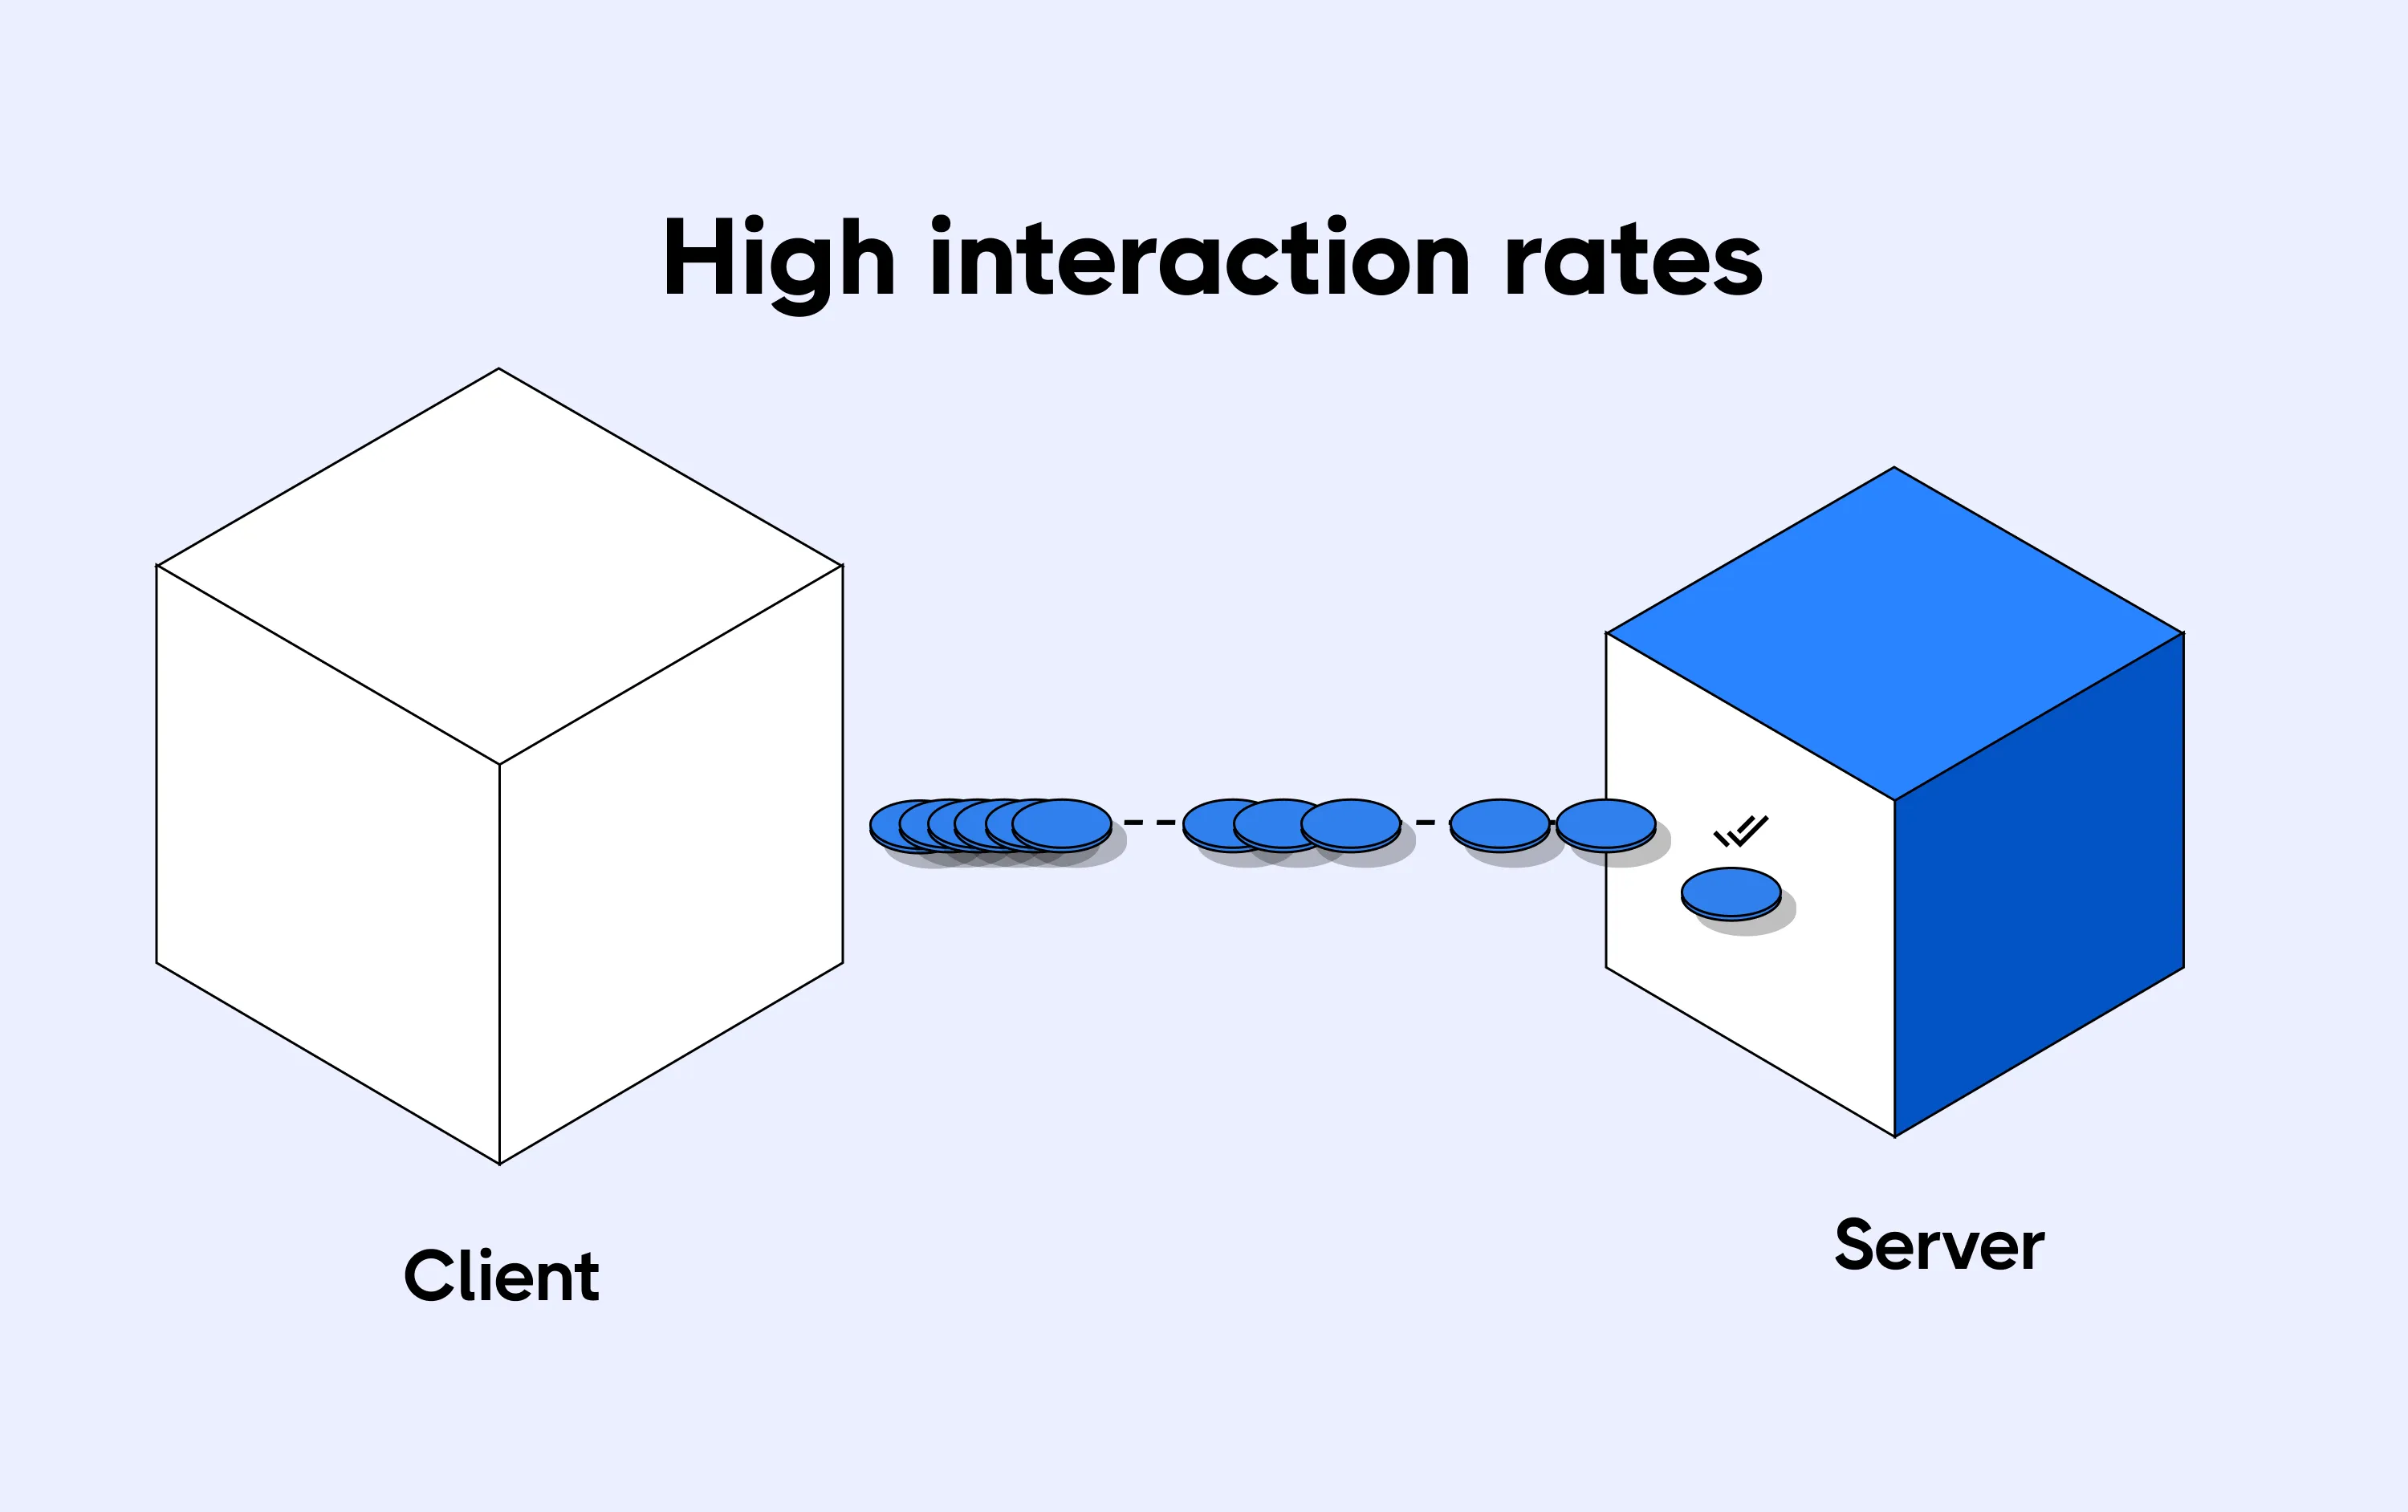 Scalability issues to handle high interaction rates